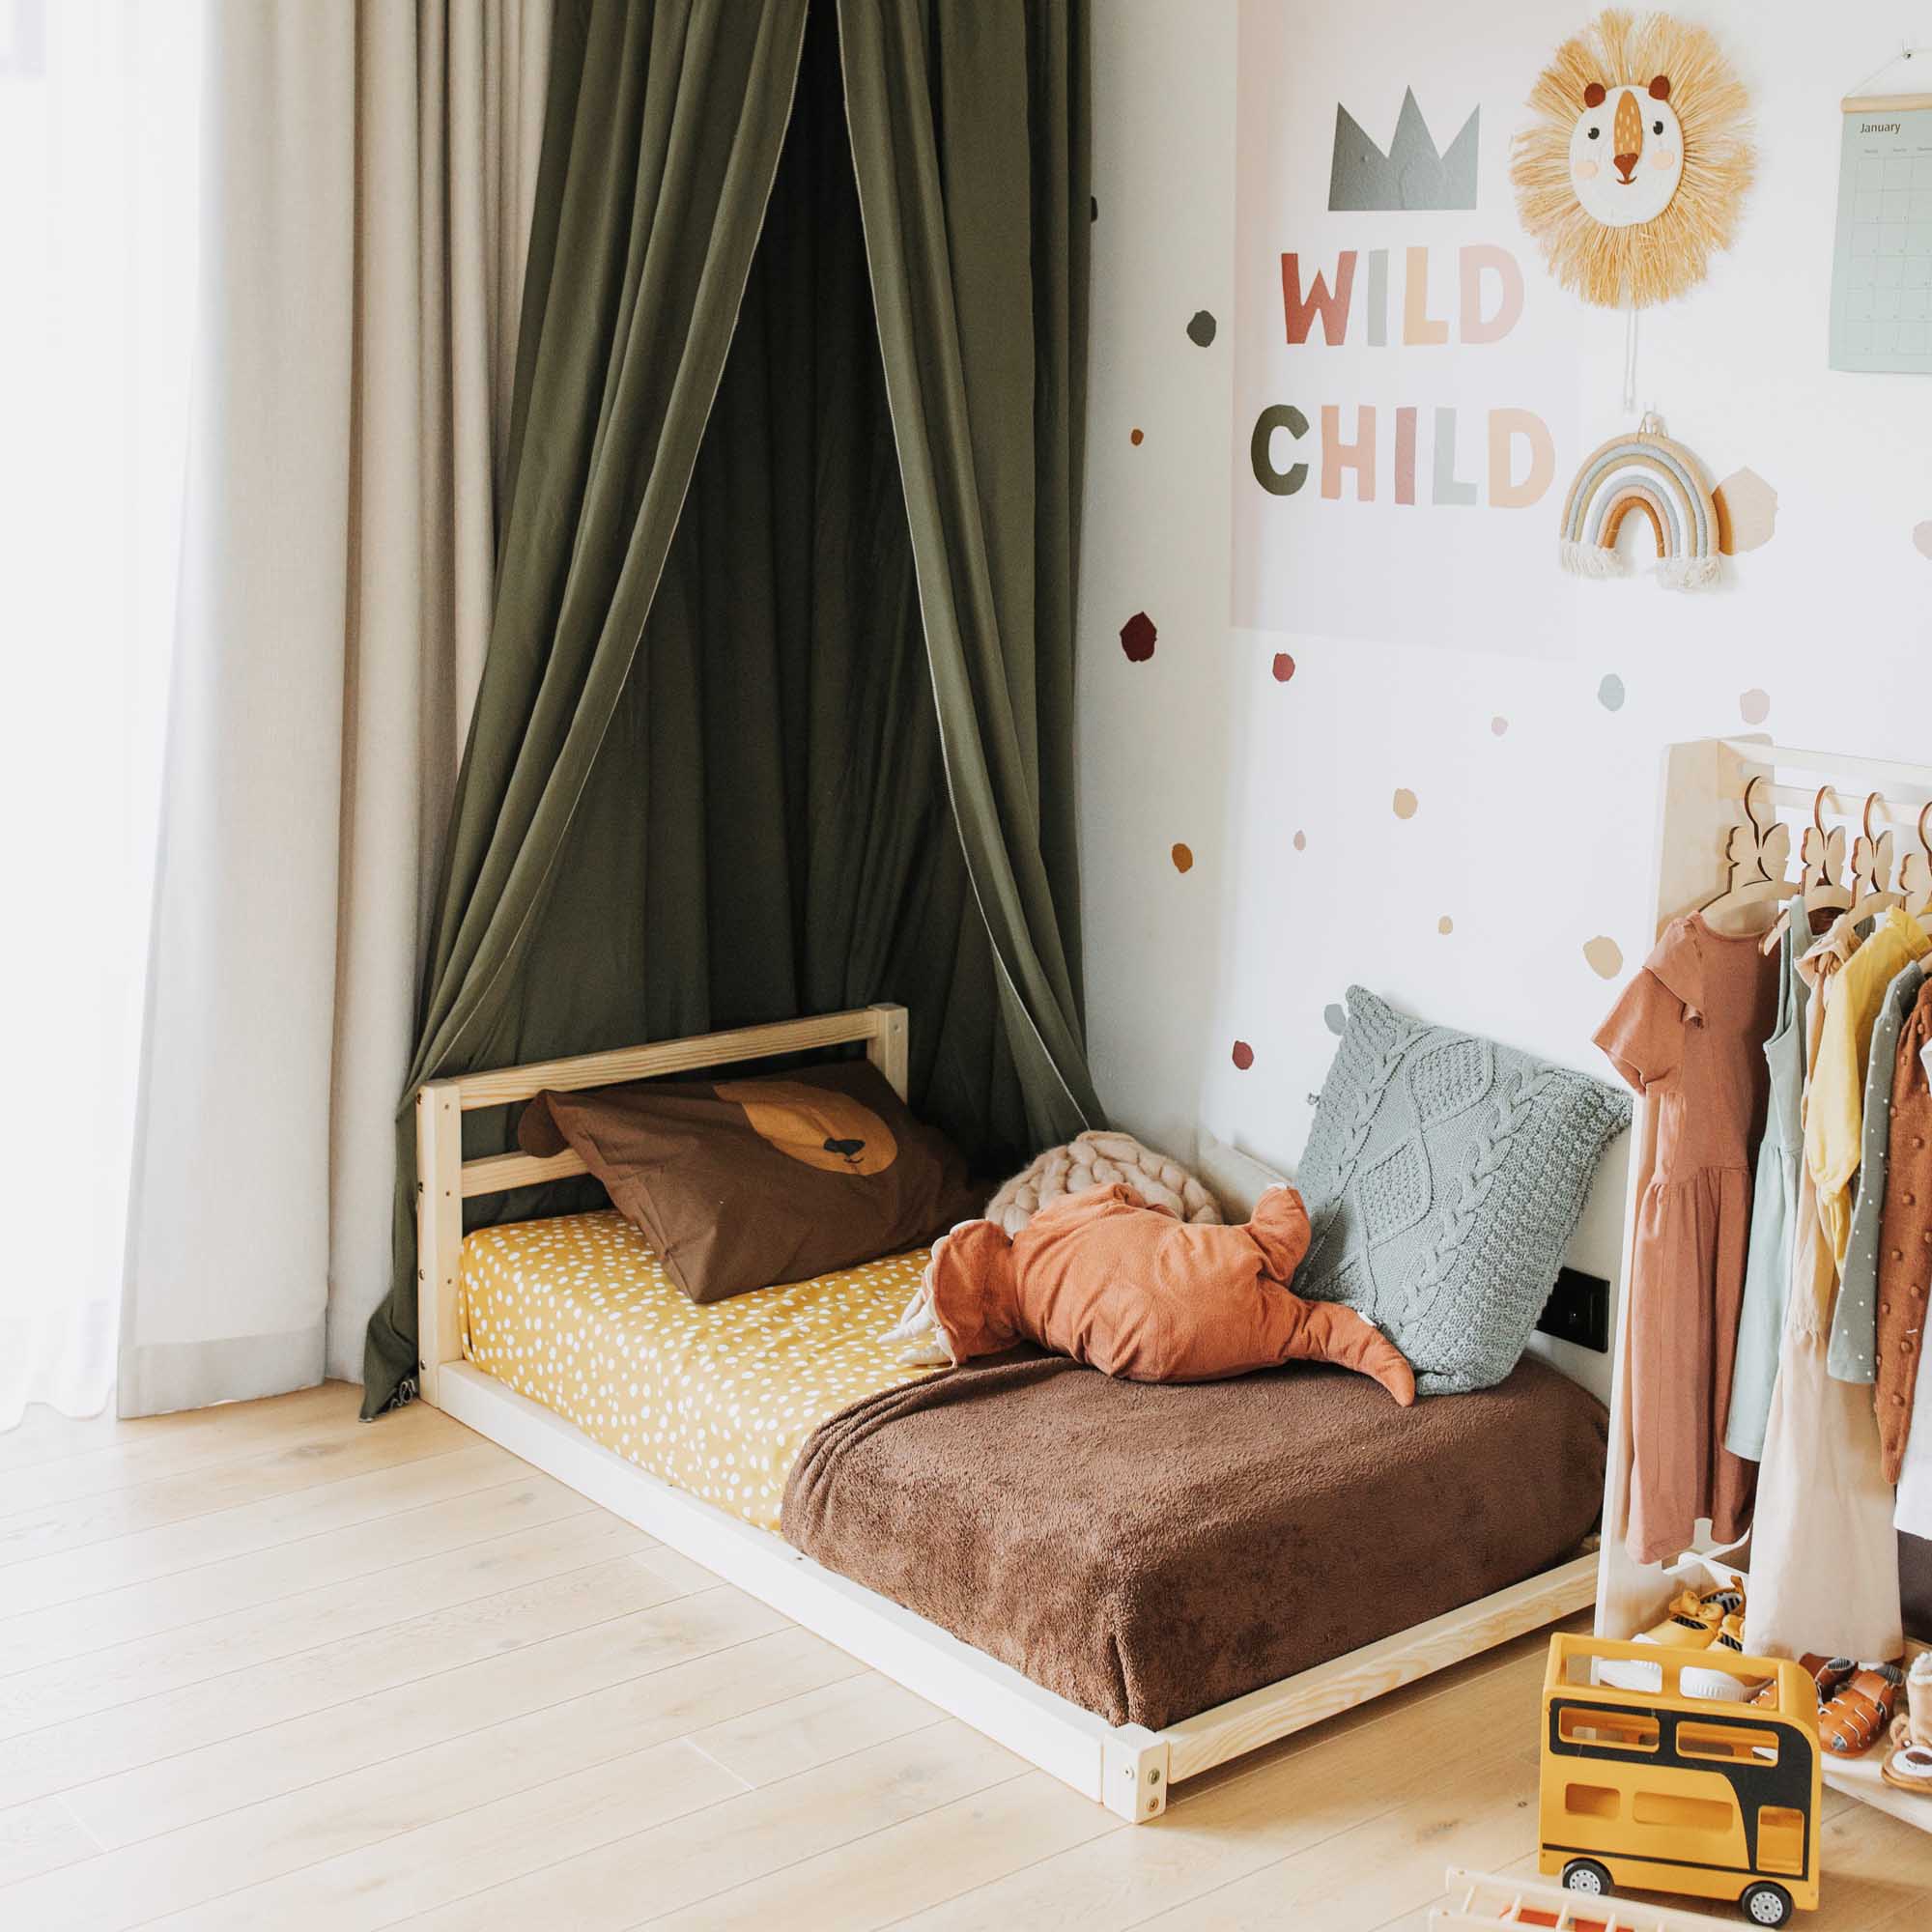 A child's room with a bed and a teddy bear.